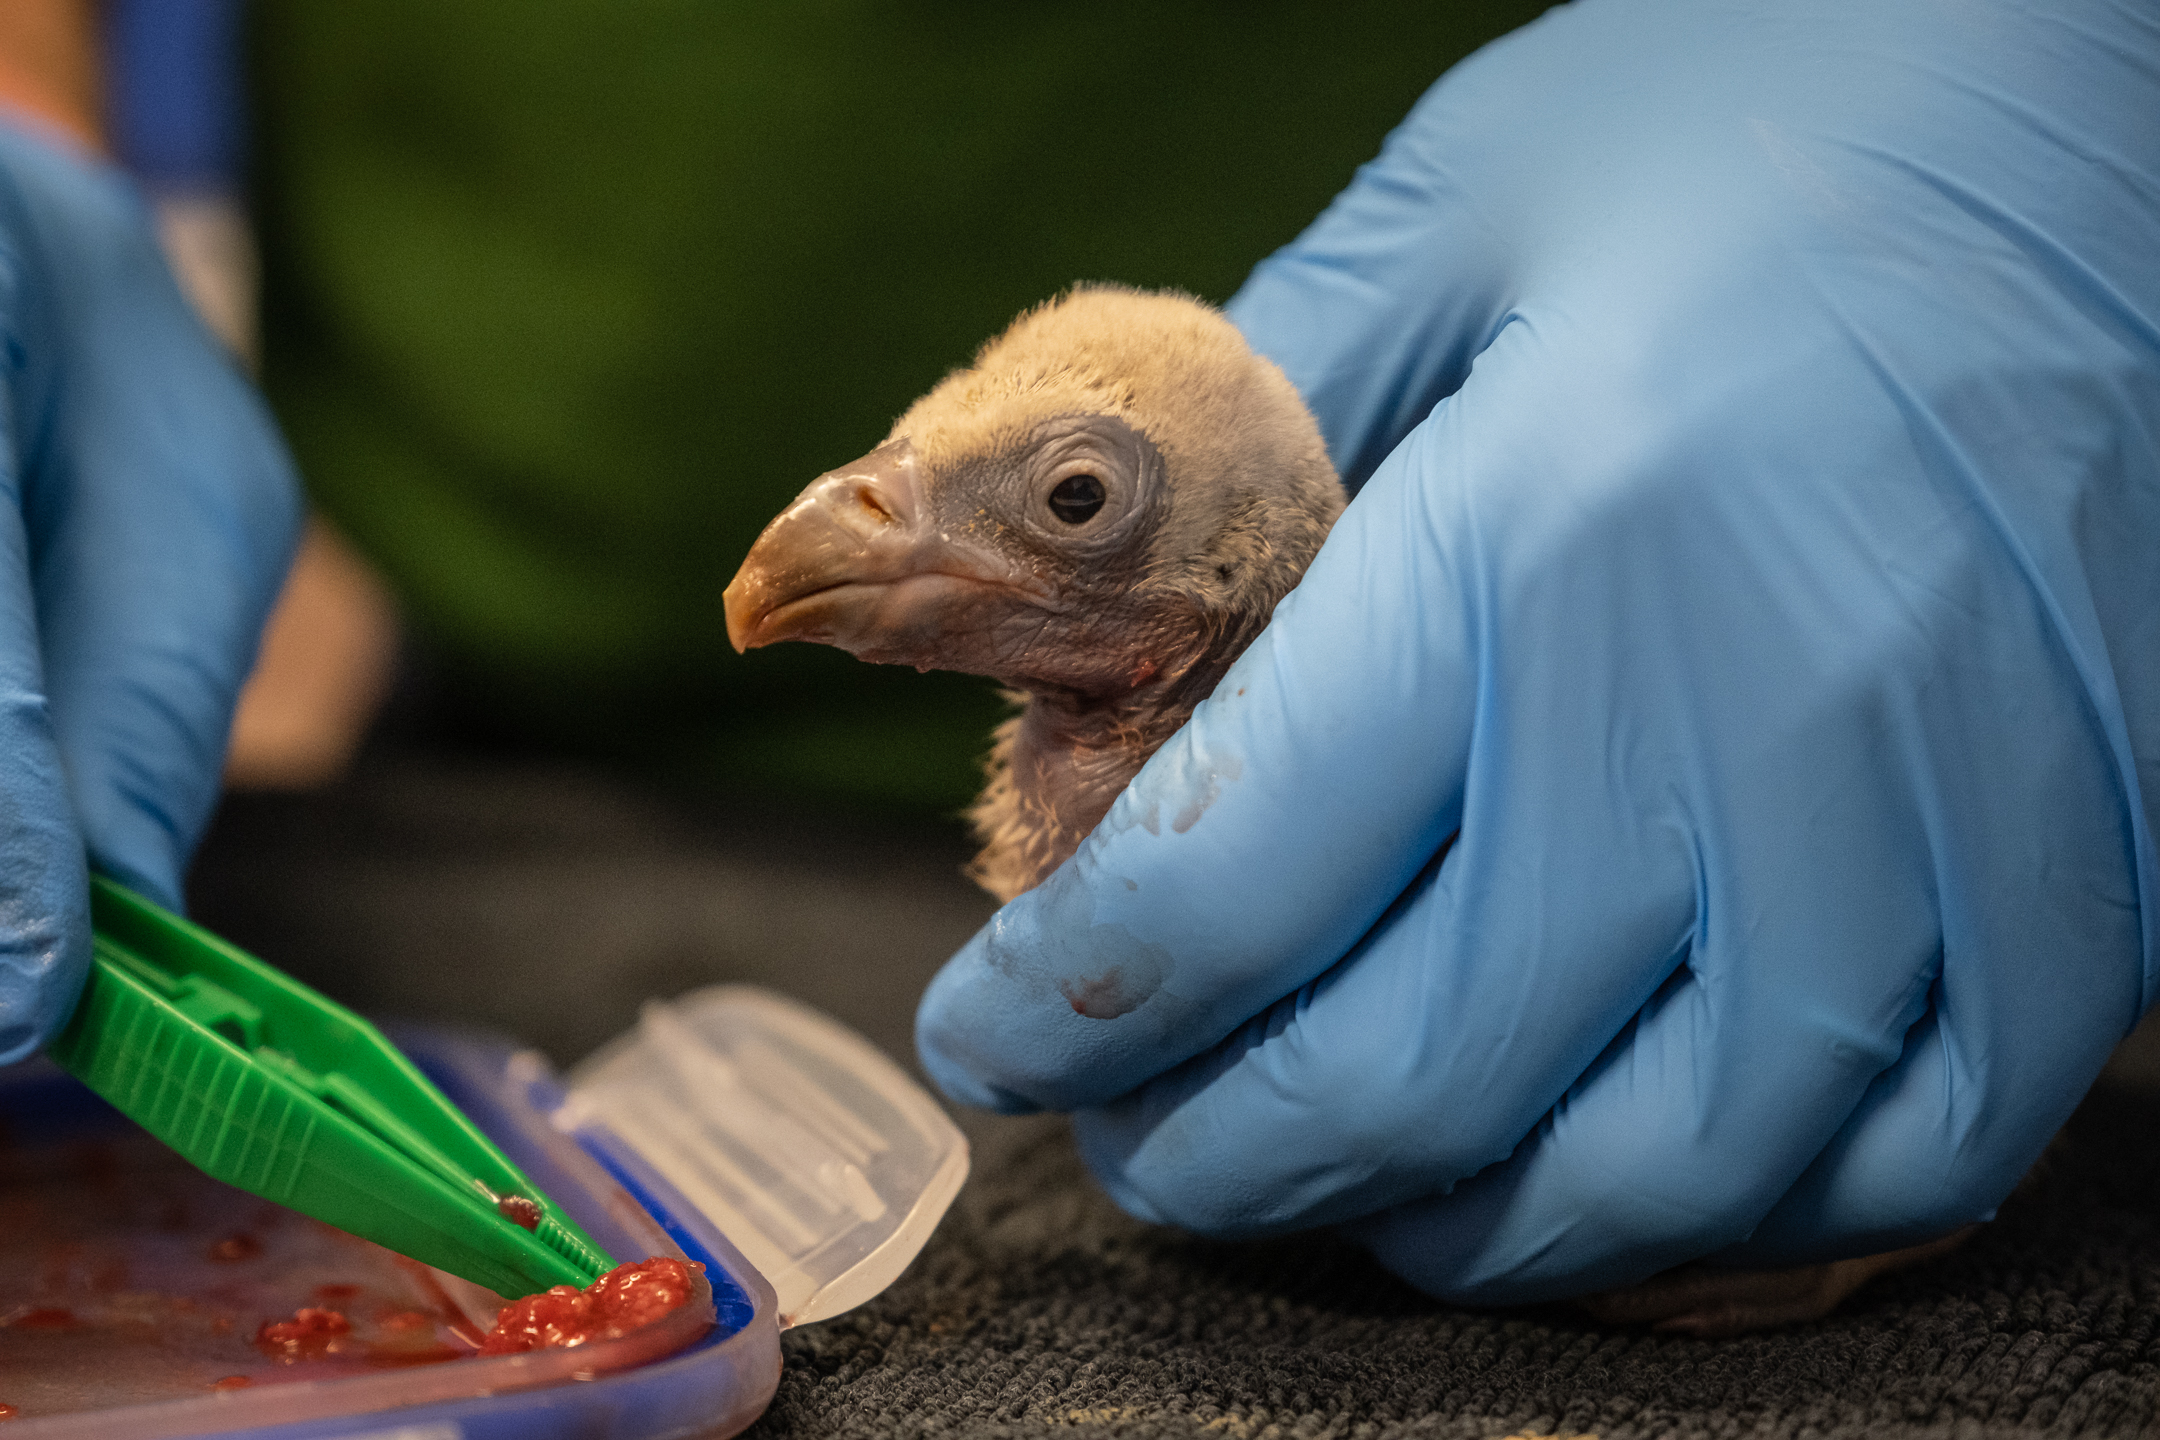 His birth was the first vulture chick hatching in over 40 years (ZSL London Zoo)